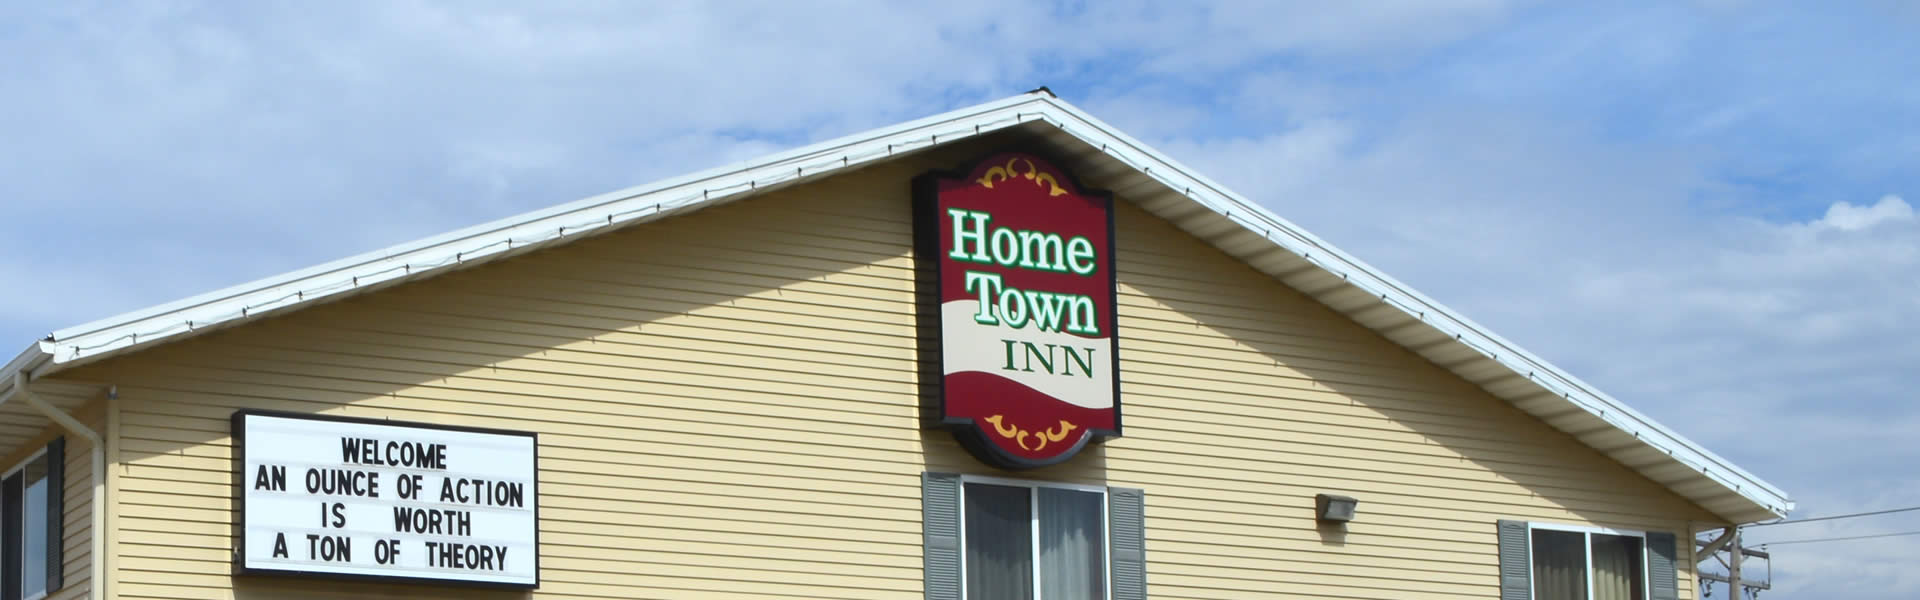 The Hometown Inn of Mayville, North Dakota offers free continental breakfast with your stay.